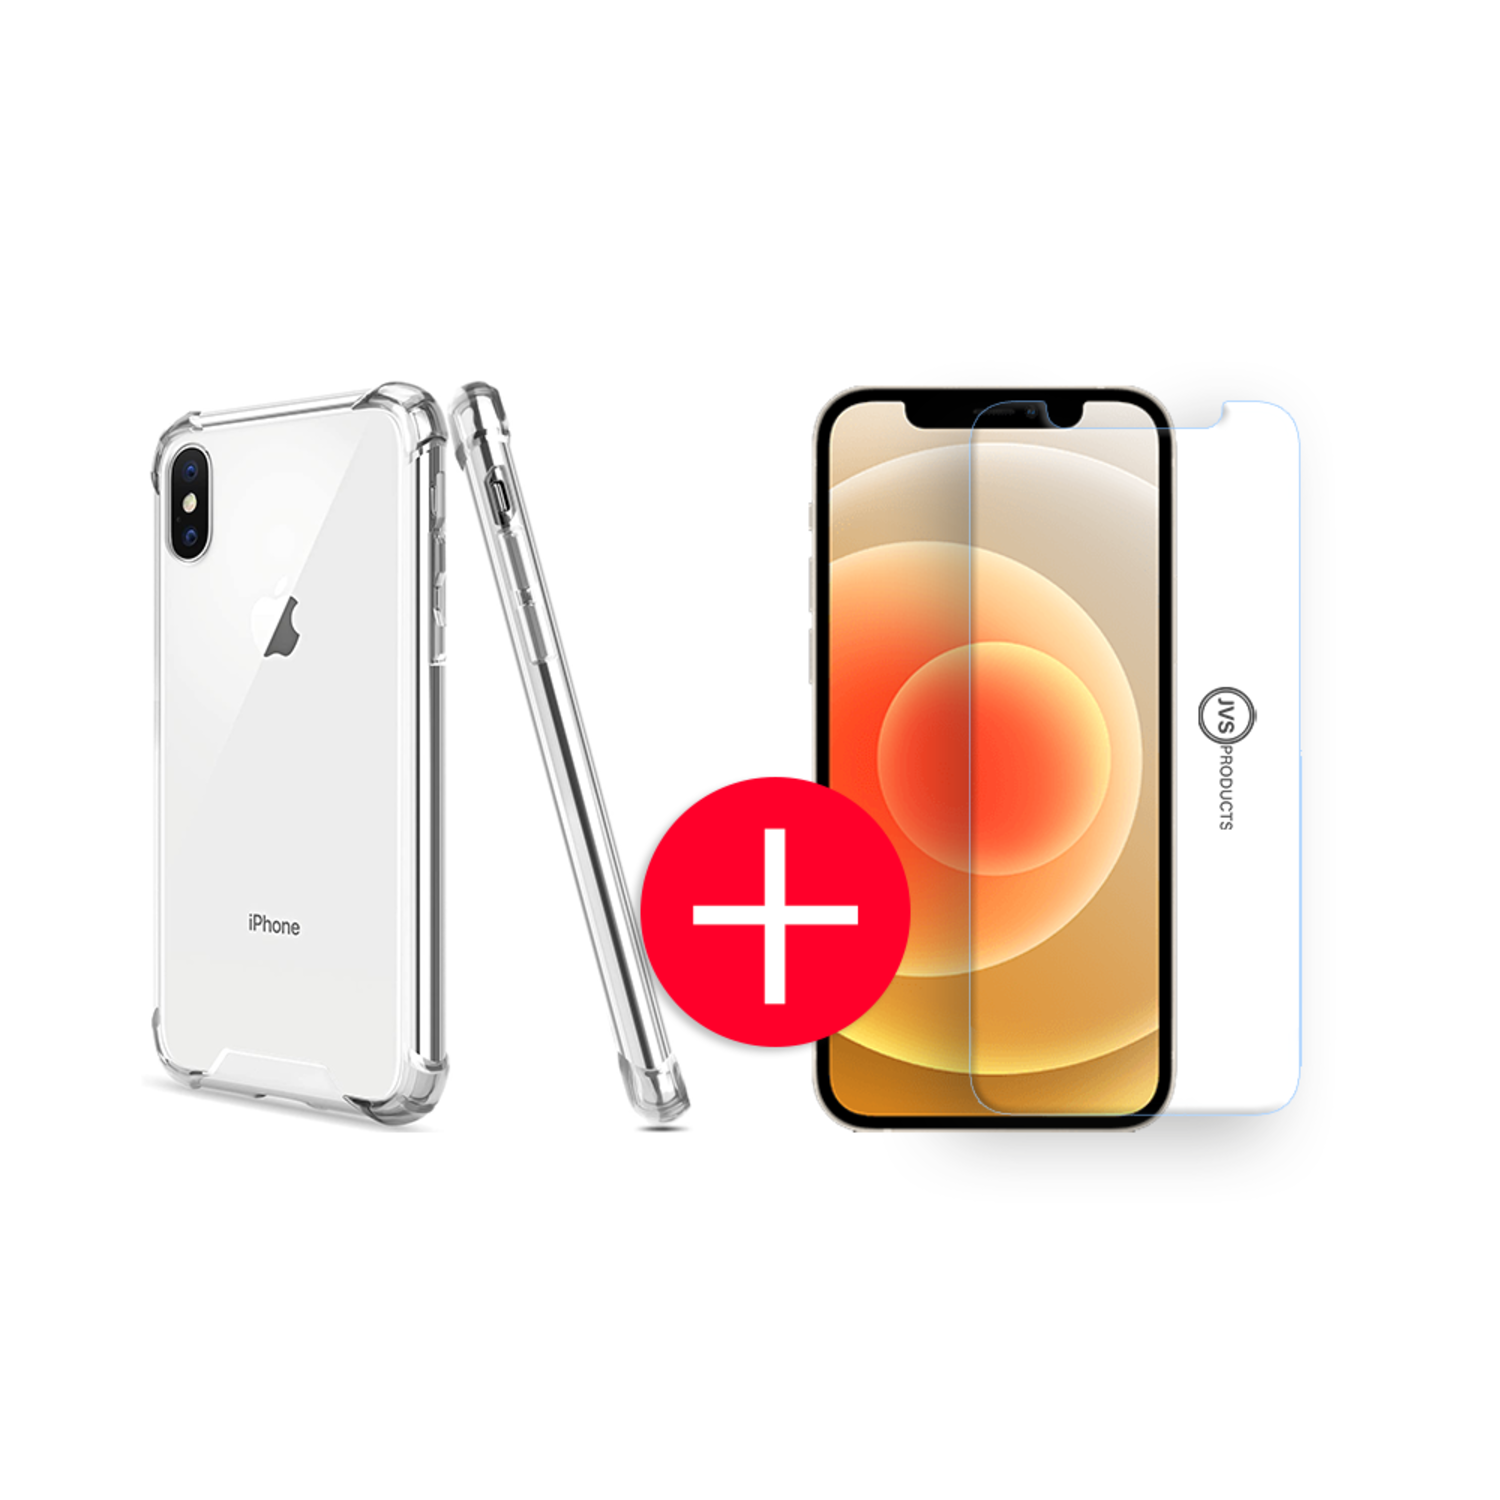 Apple Iphone XS Max Anti-Shock Hoesje + - Transparant Extra Dun Apple Iphone XS Max hoes cover case Screenprotector kit AllYourGames.nl